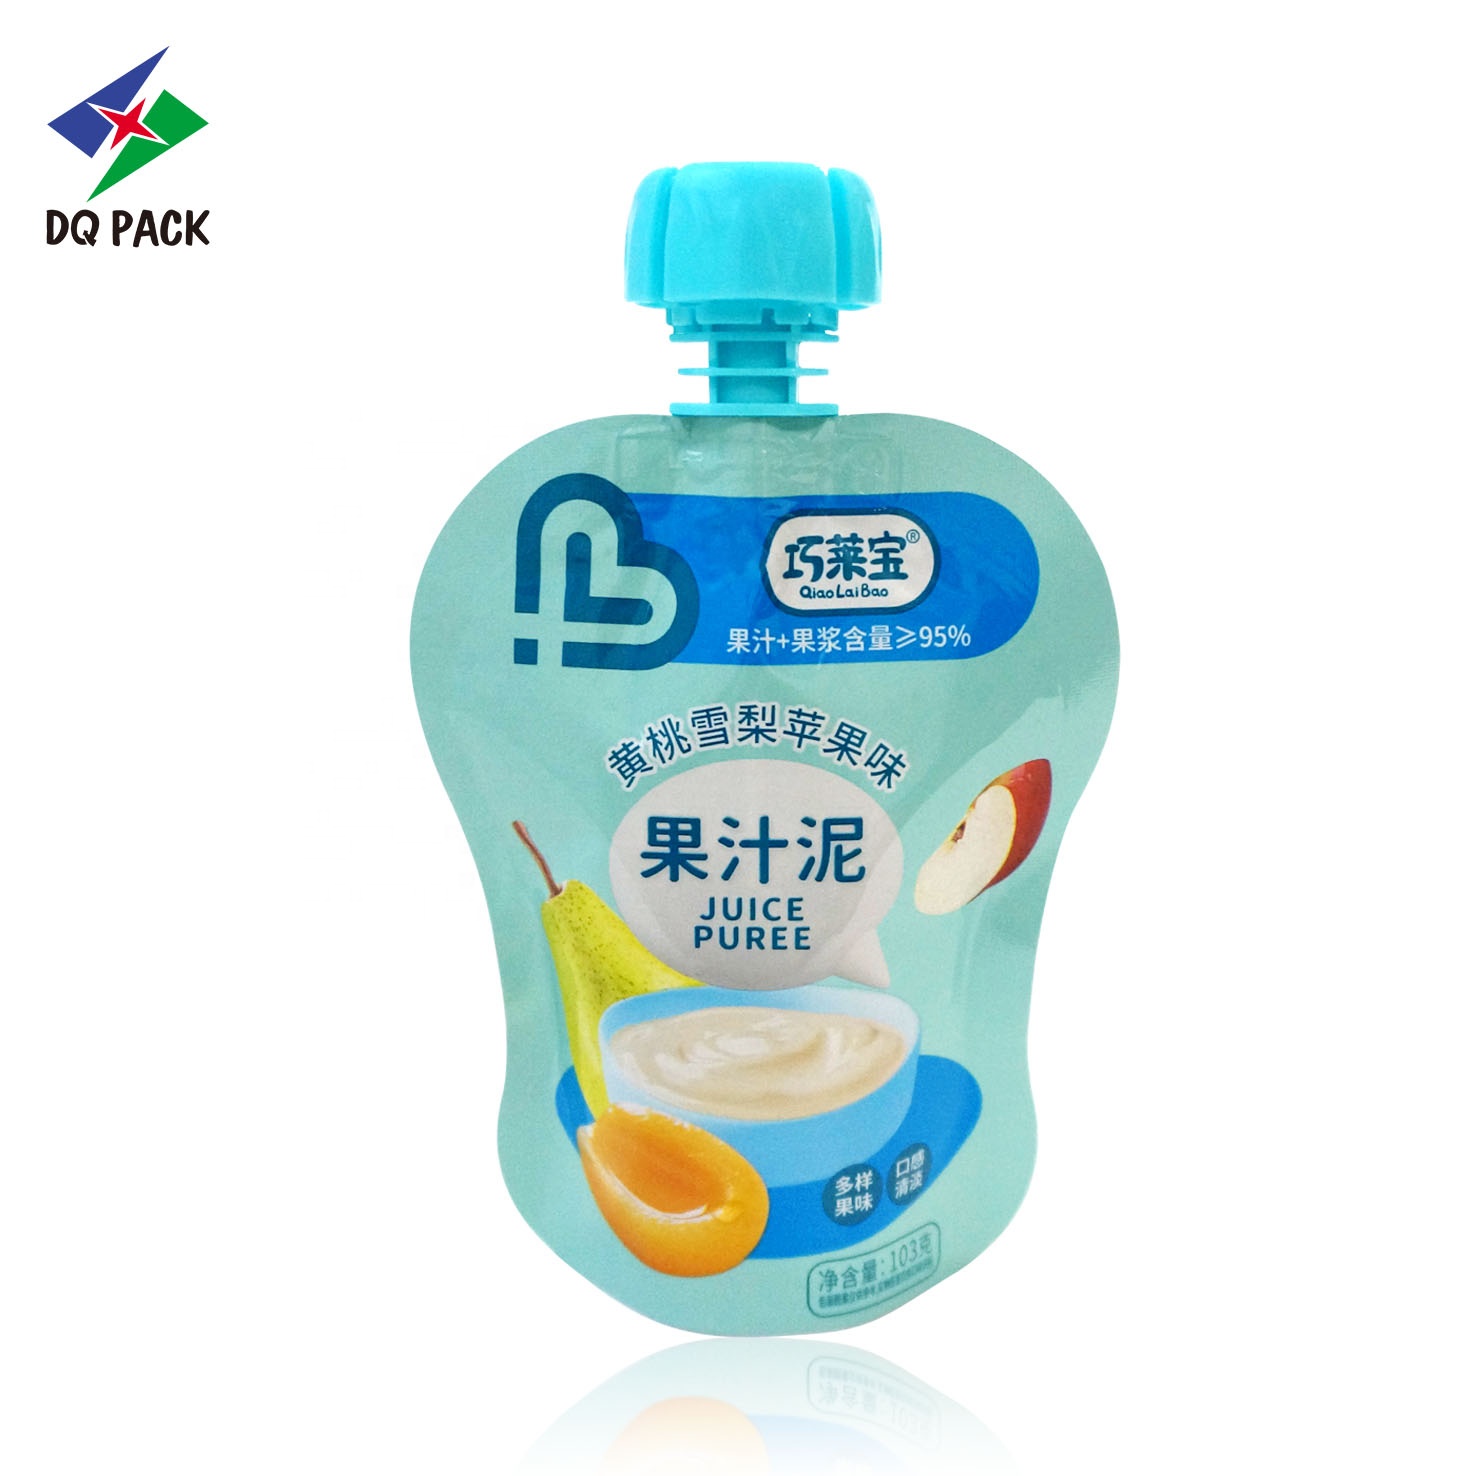 DQ PACK China Doypack Spout Pouch Juice or Fruit Puree or Jelly Packaging Stand Up Pouch With Spout